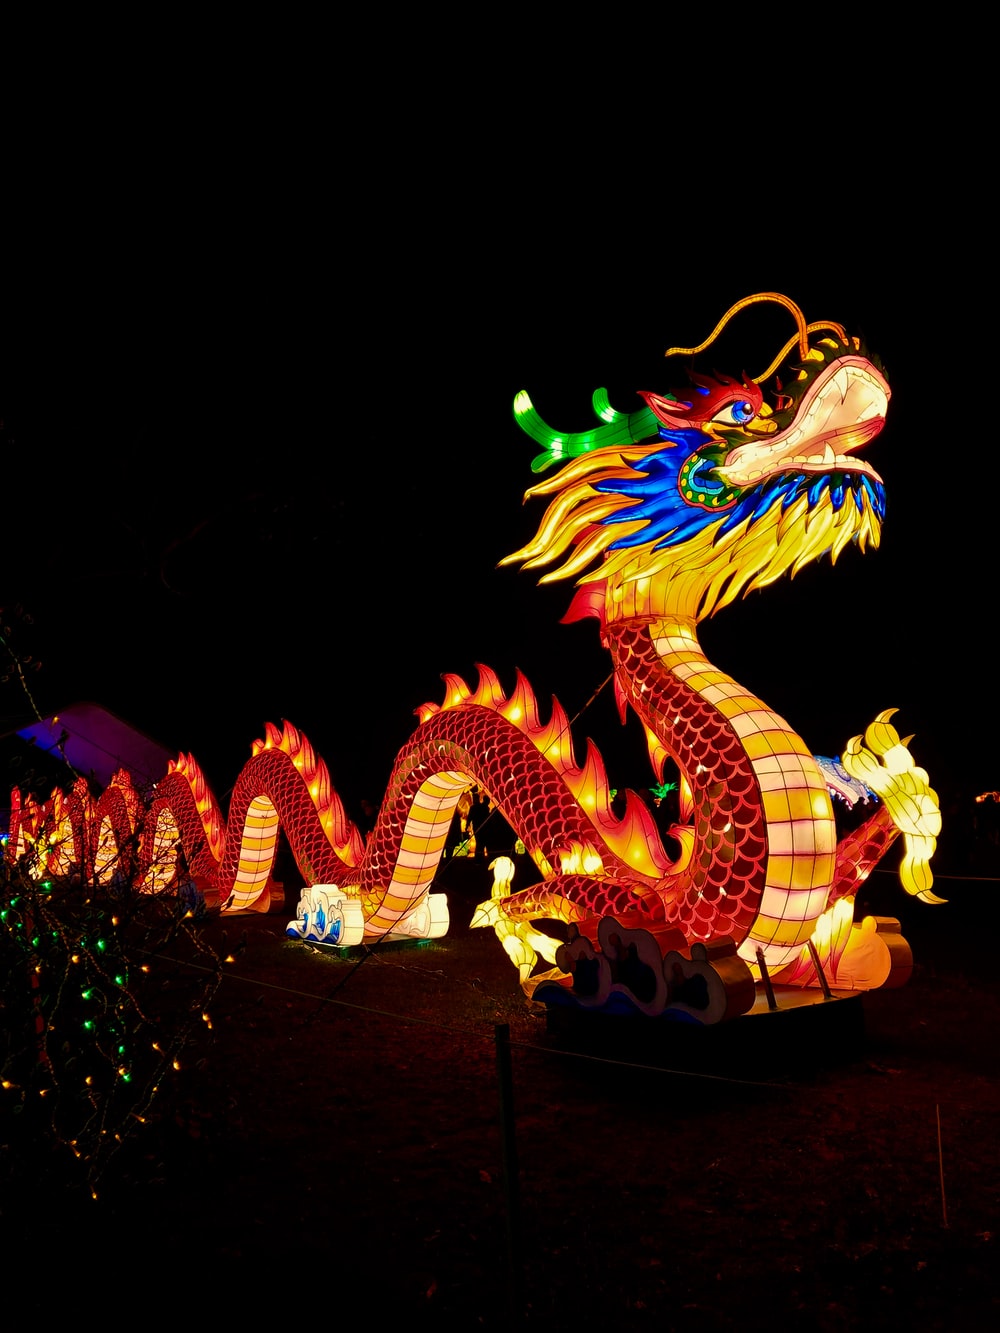 Detail Dragon Pictures To Download Nomer 47